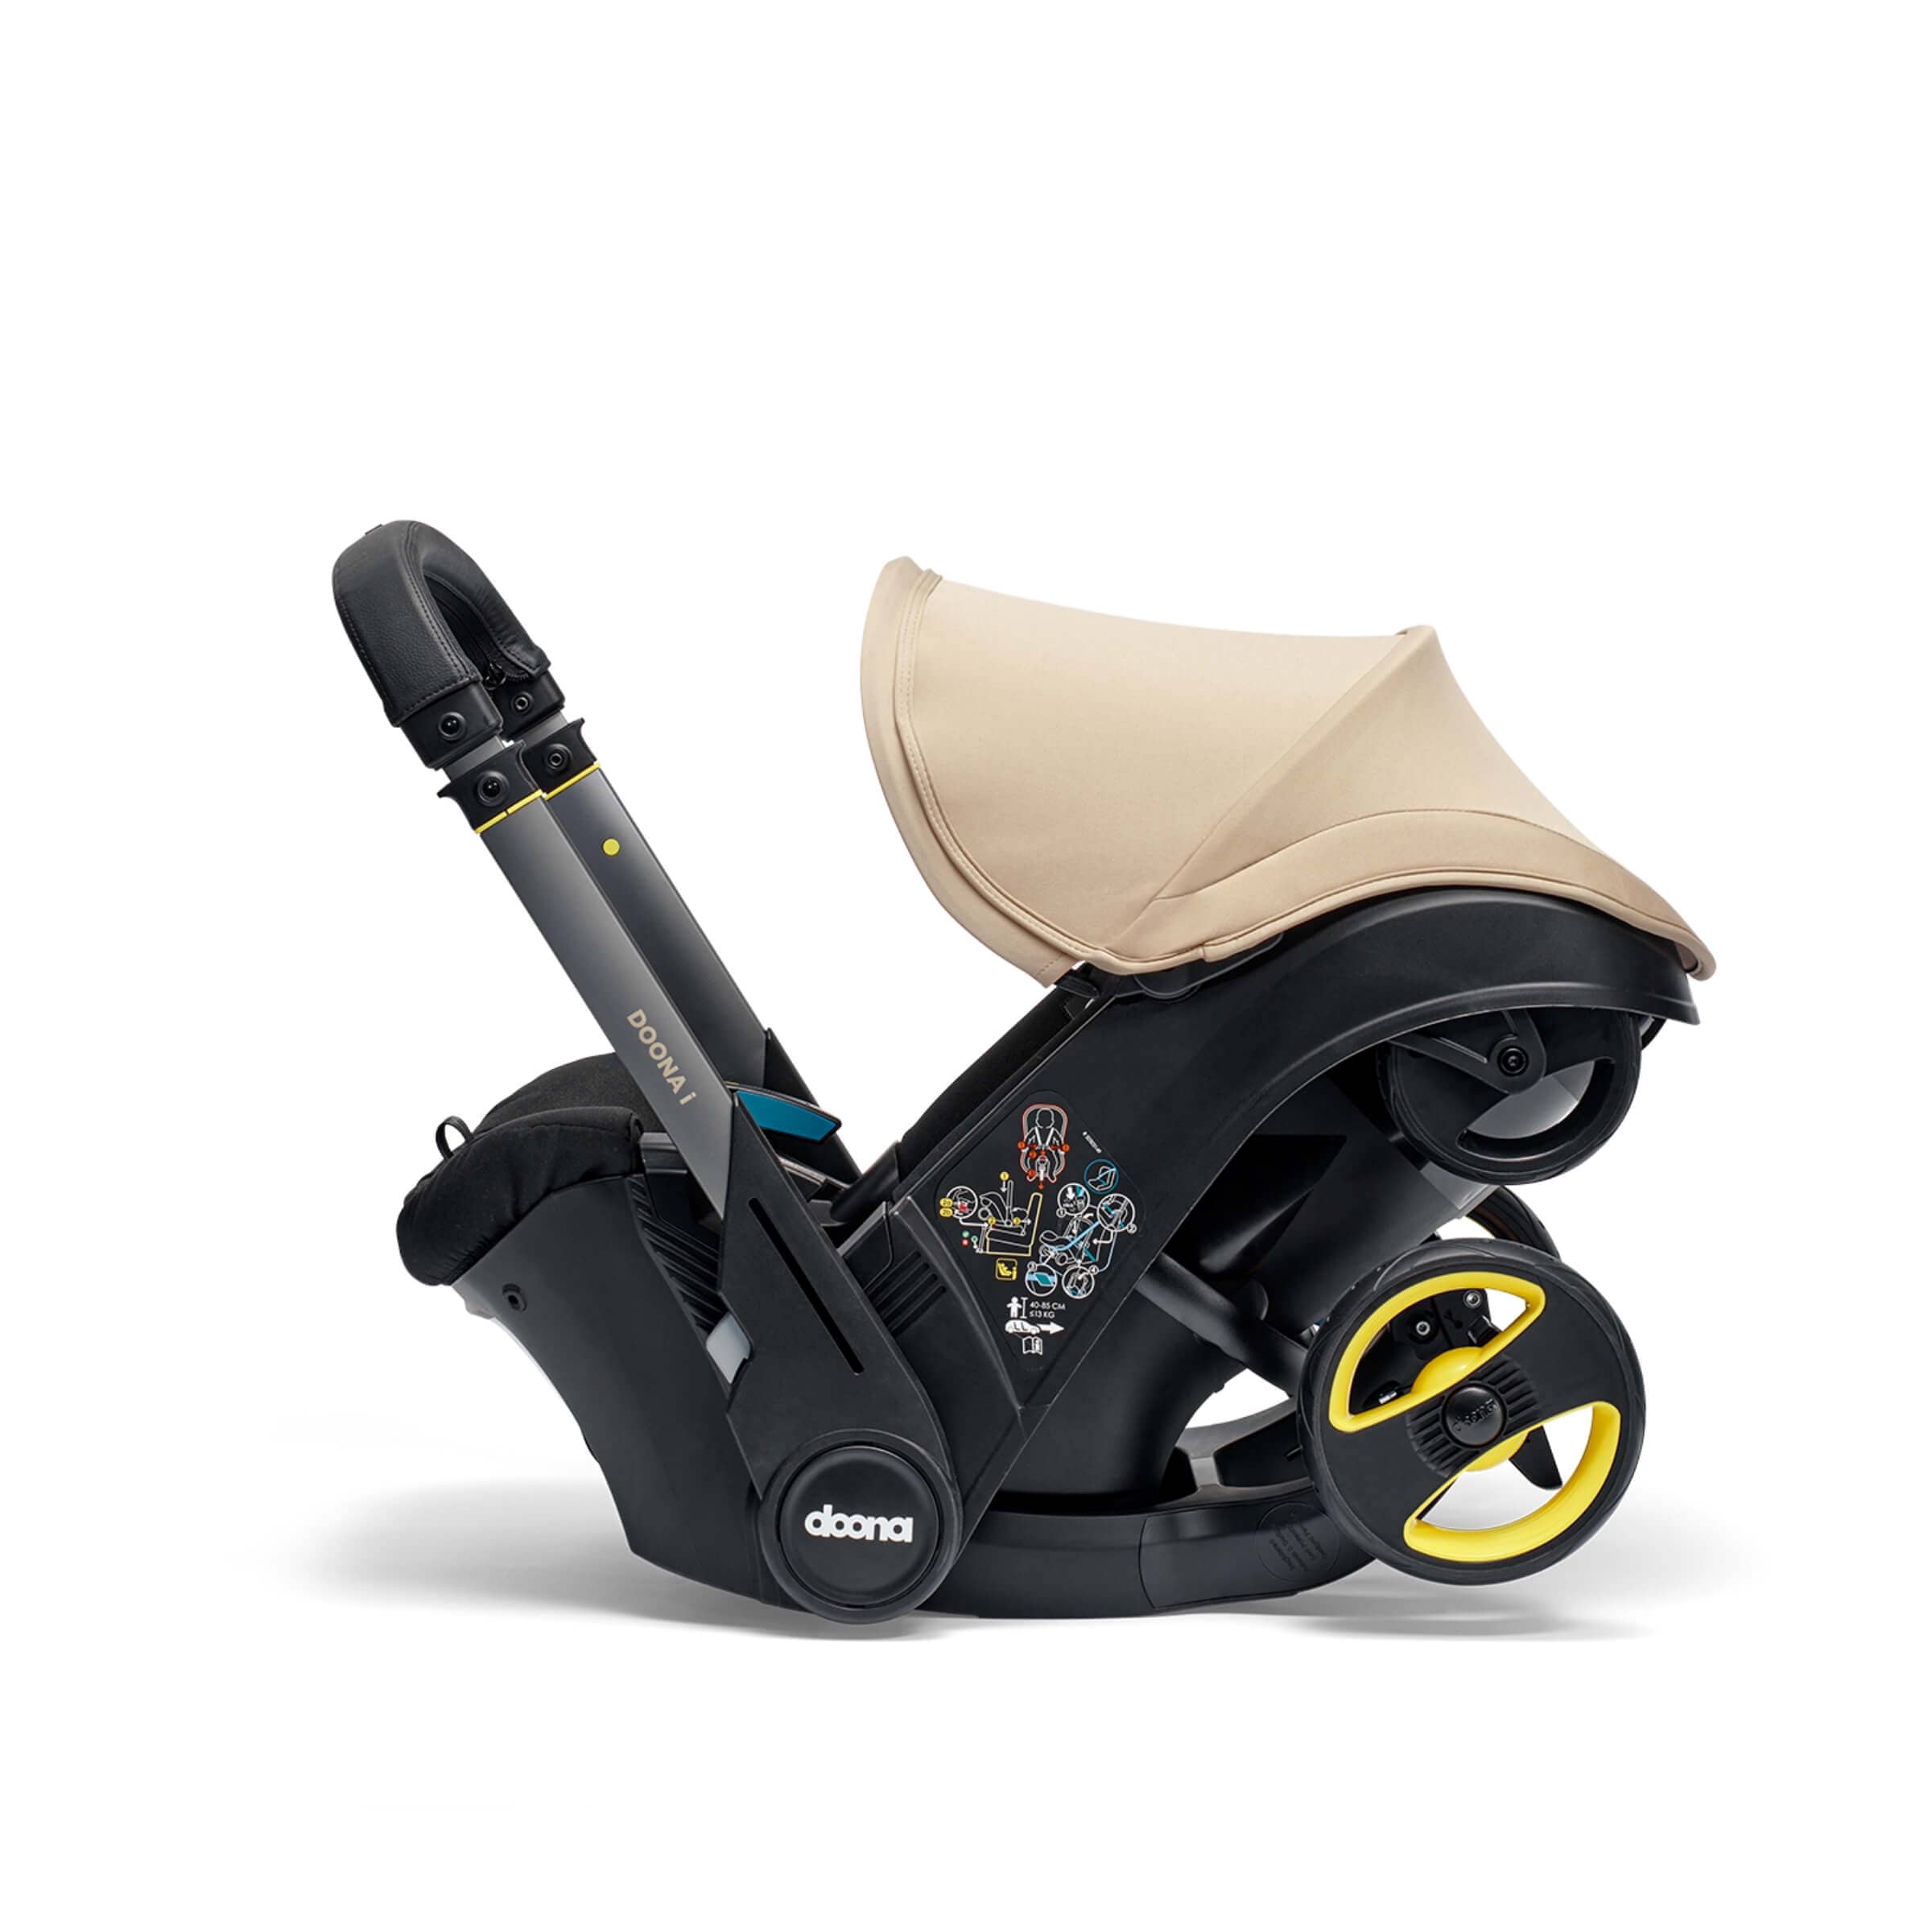 Doona i infant Car Seat - Sahara Sand -  | For Your Little One